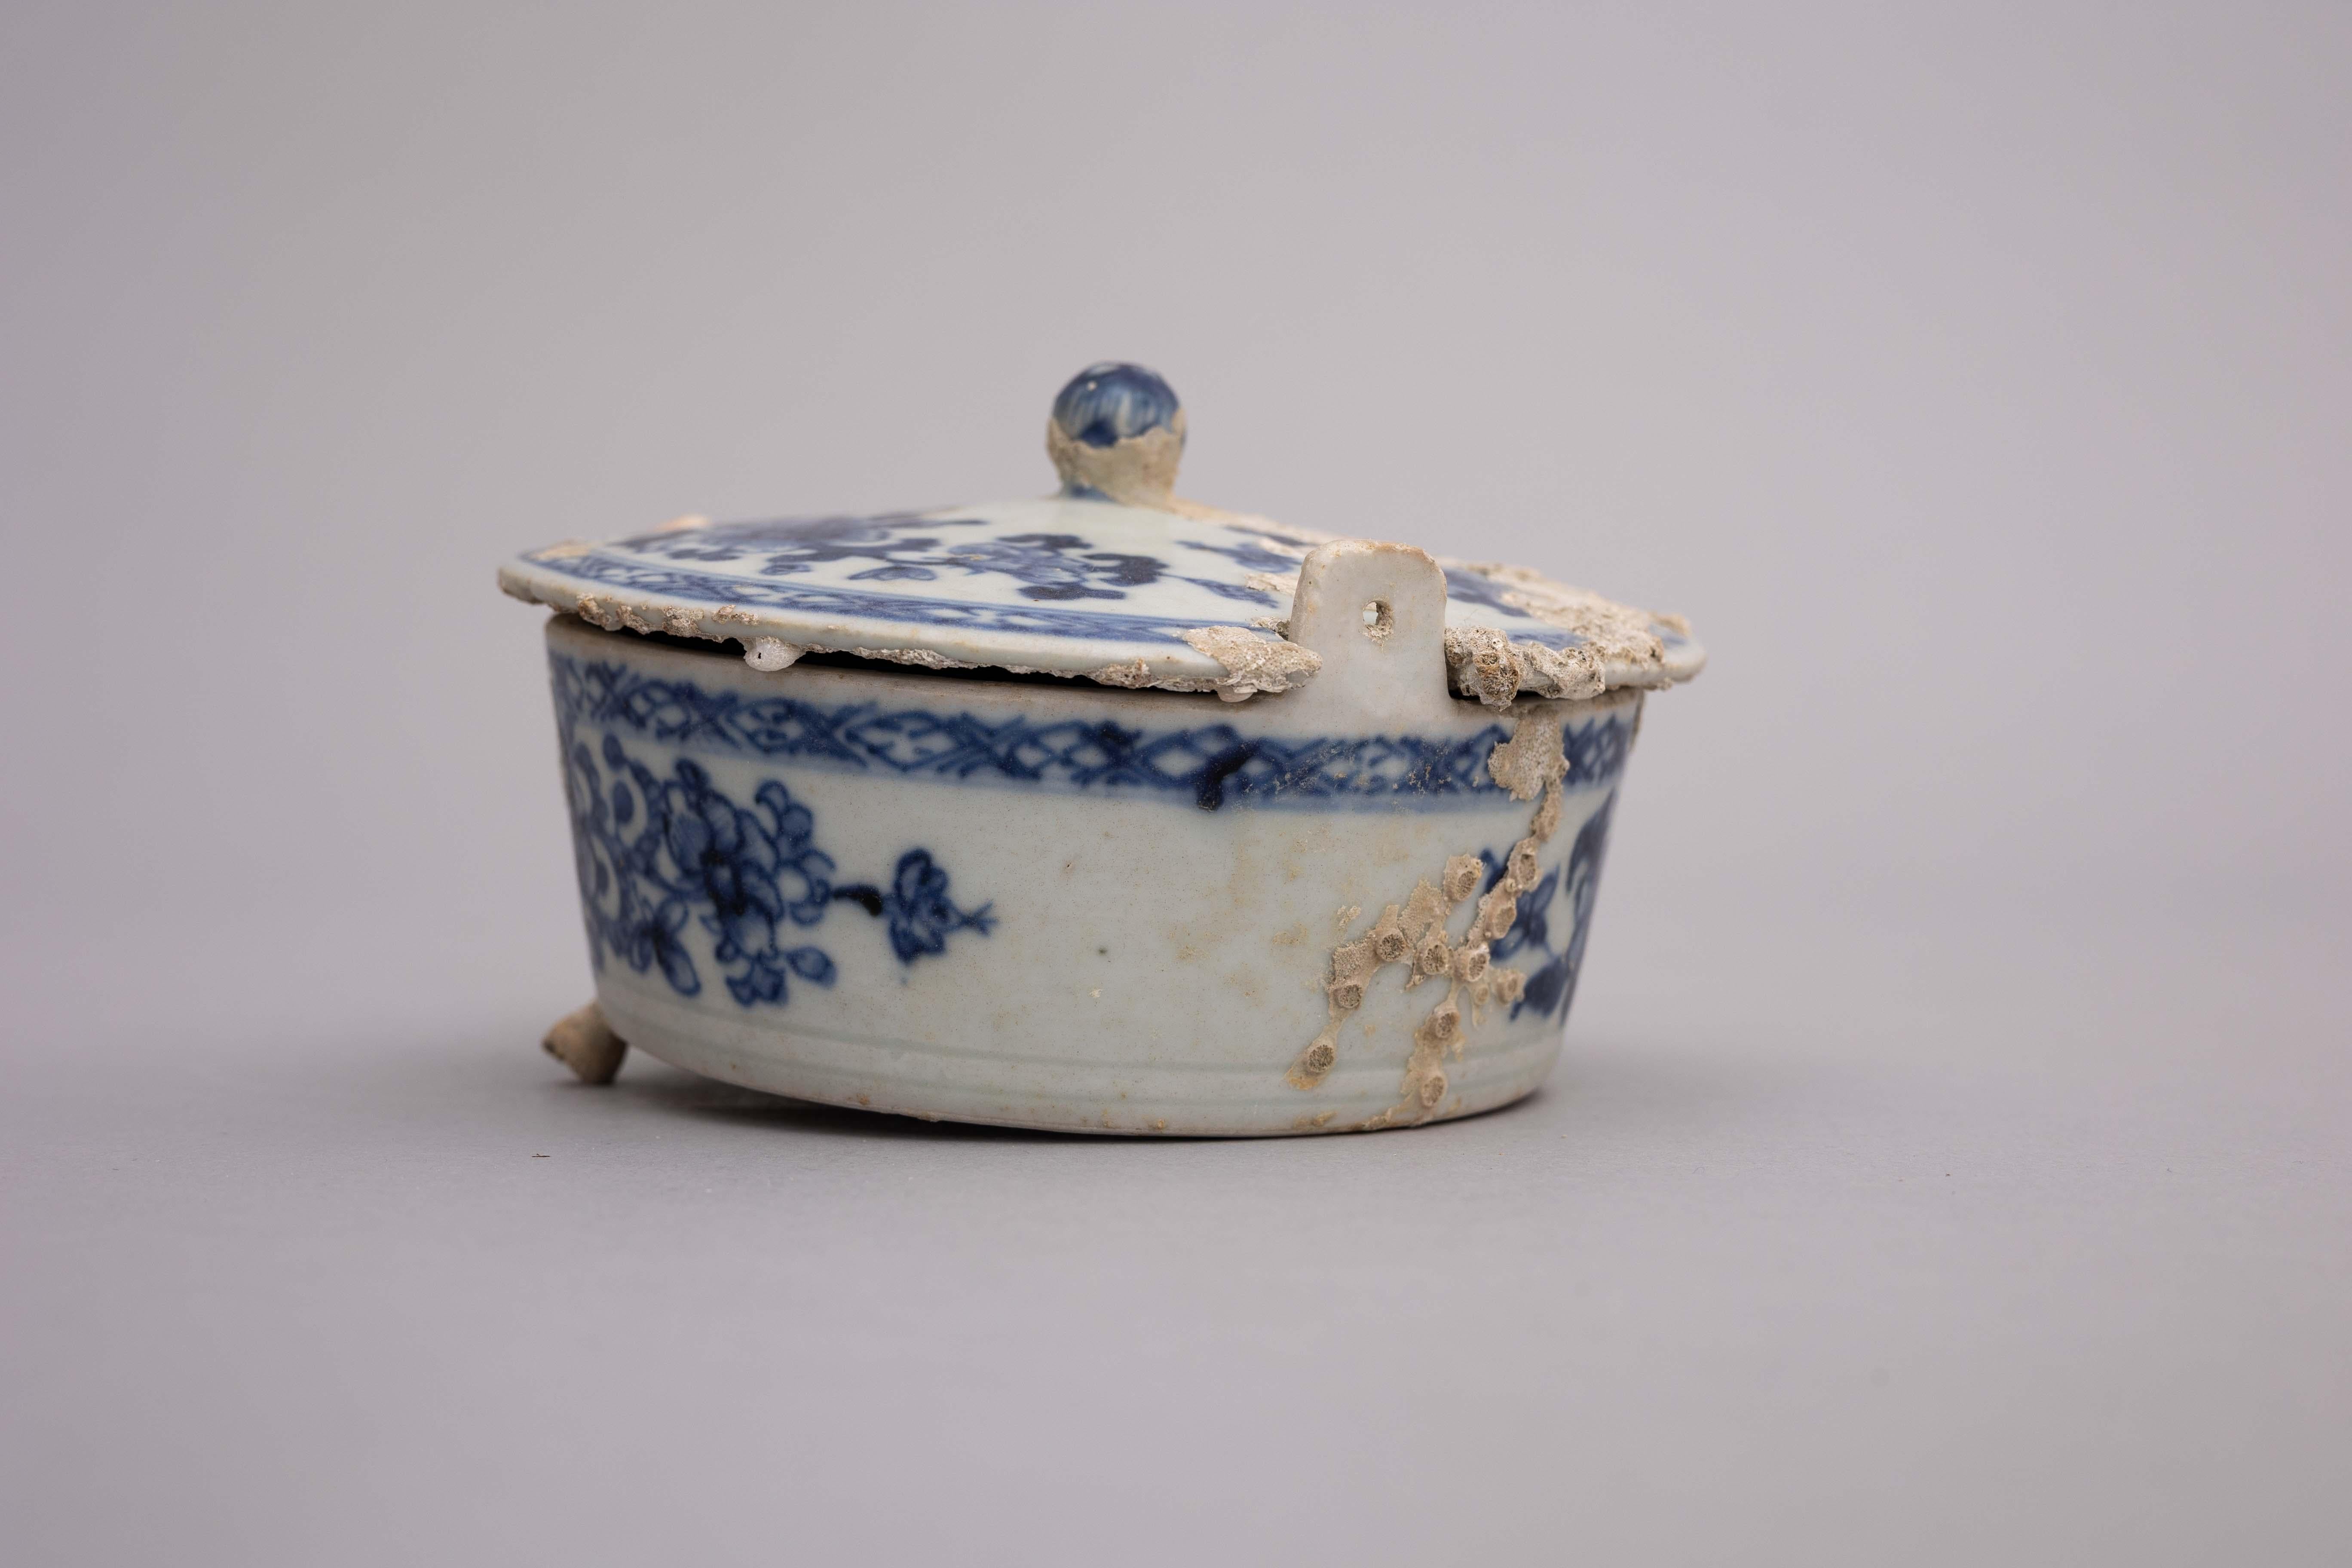 Hand-Painted Shipwrecked 18th Century Blue and White Chinese Porcelain Butter Tub For Sale